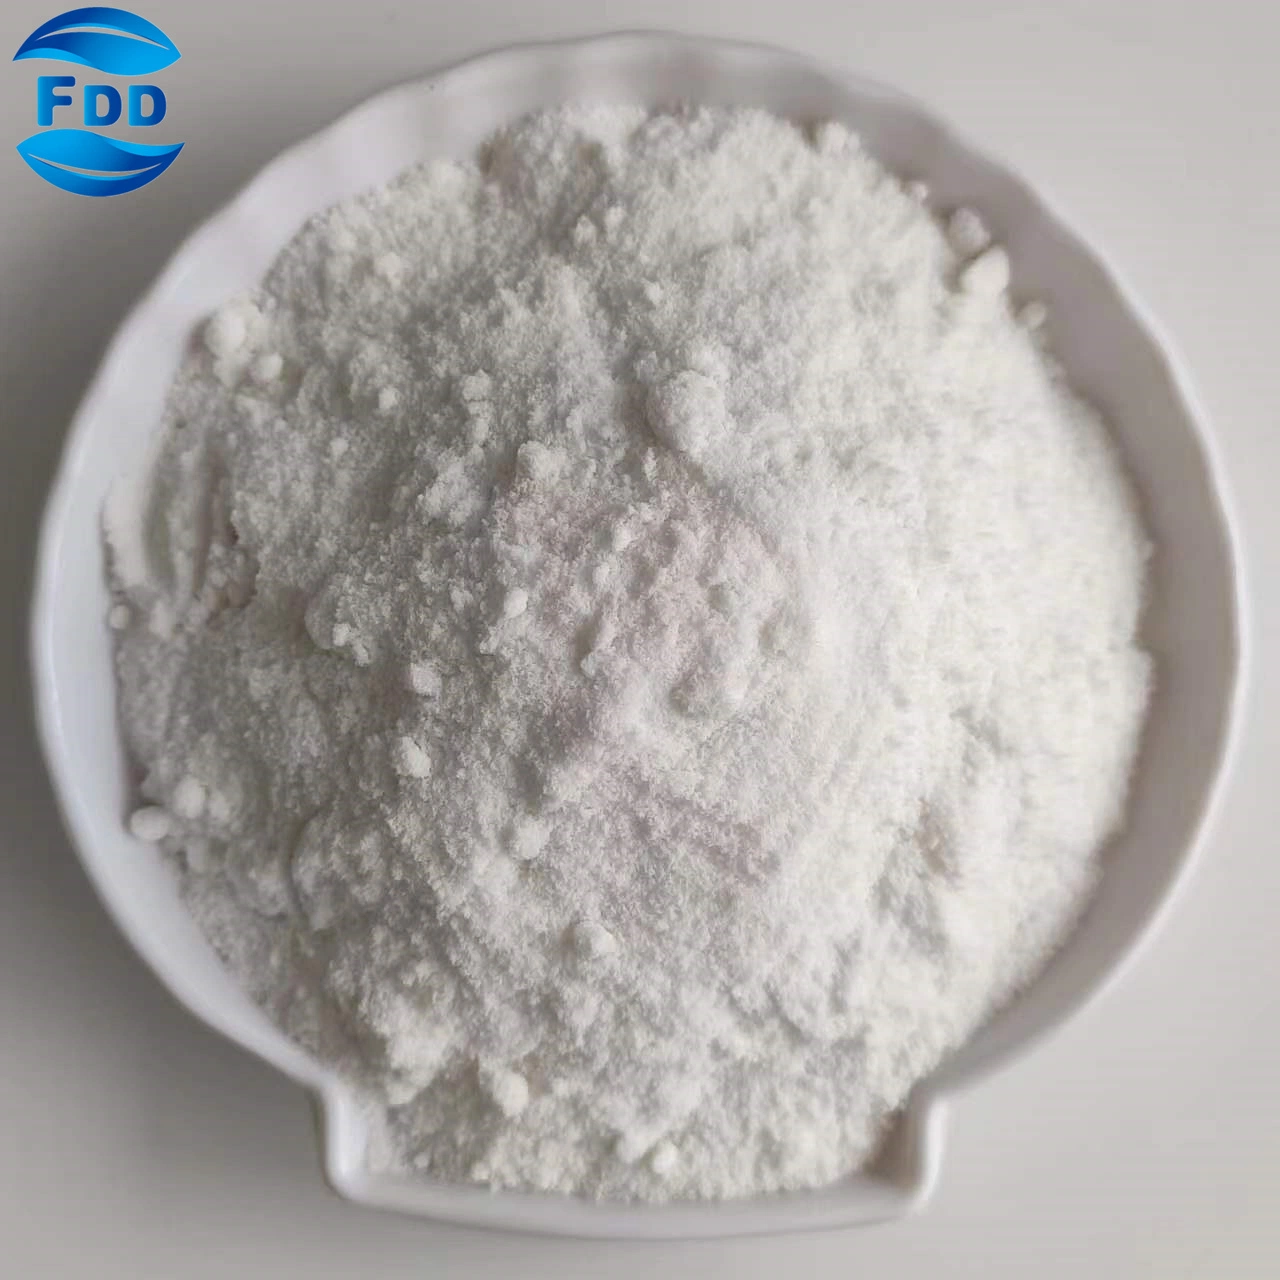 Technology Industry Grade Feed Grade Calcium Formate 98% for Concrete Additive Accelerator for Cement Based Dry Mortars and Animal Digestion